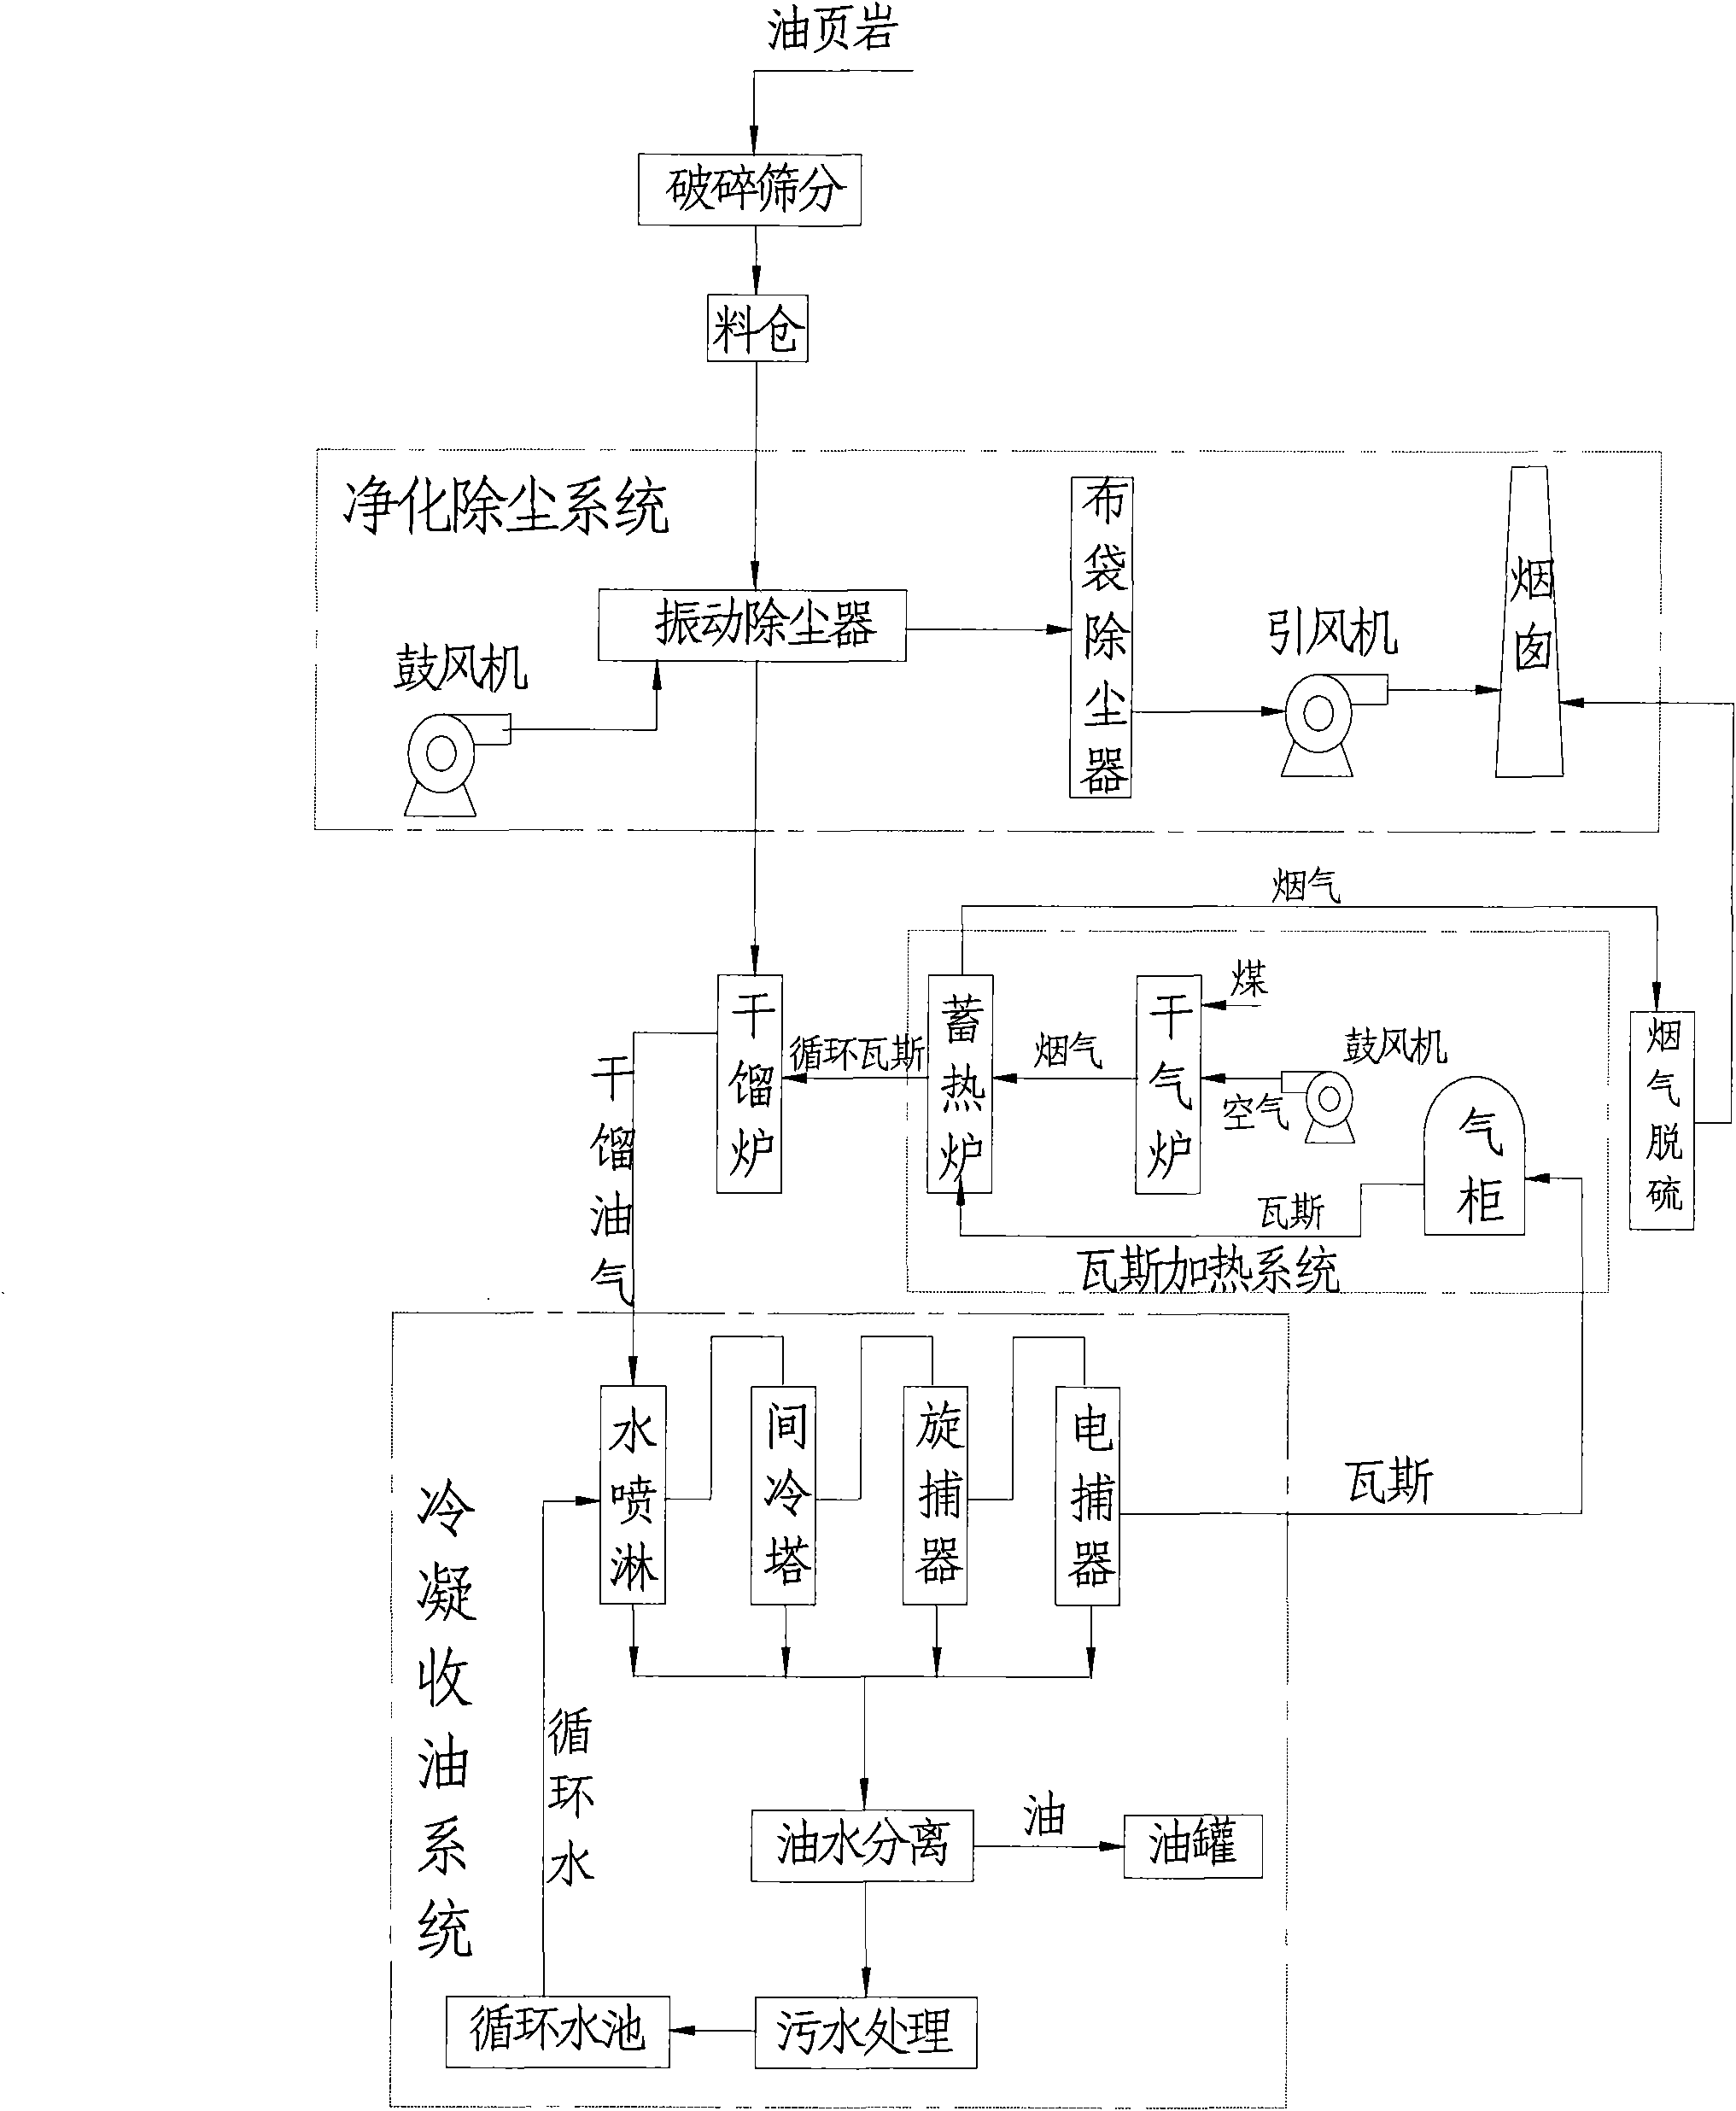 Process and device for dry distillation of oil shale with low gas content